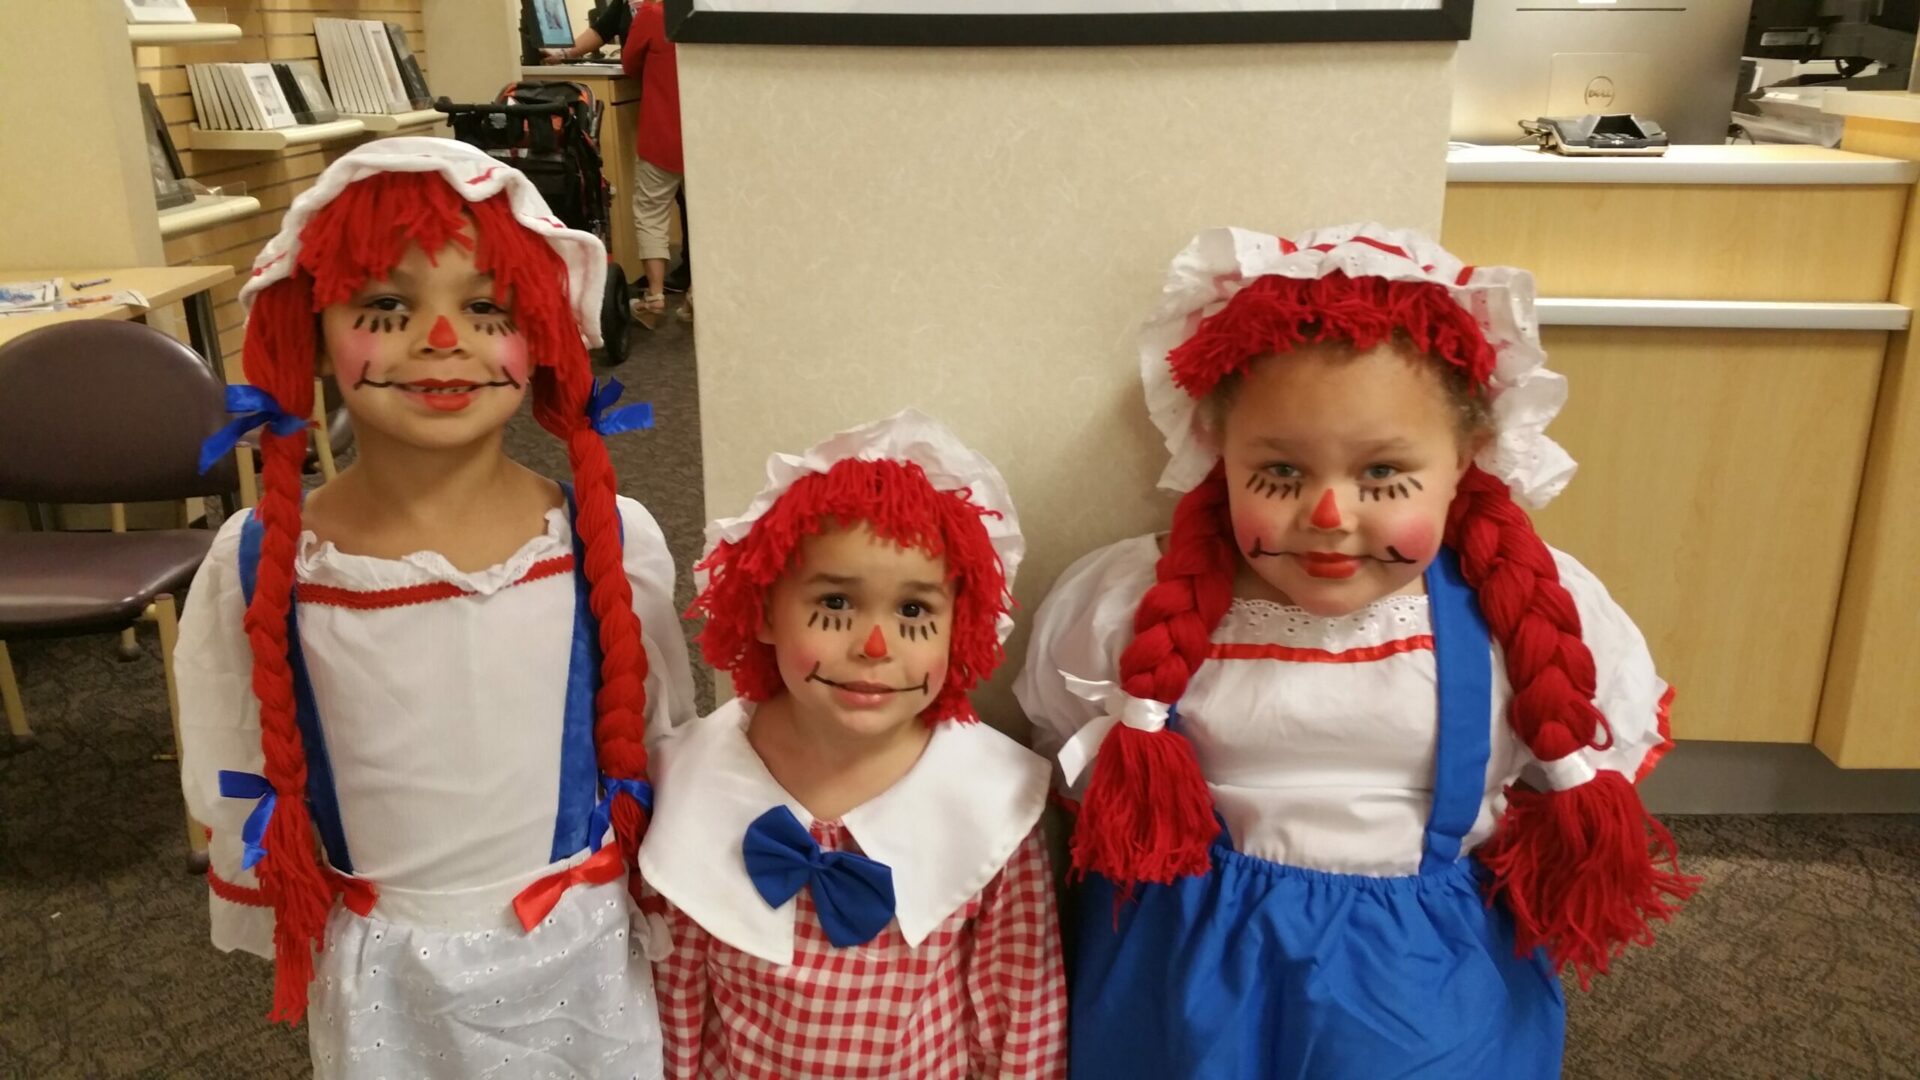 Three children dressed up as raggedy ann and andy